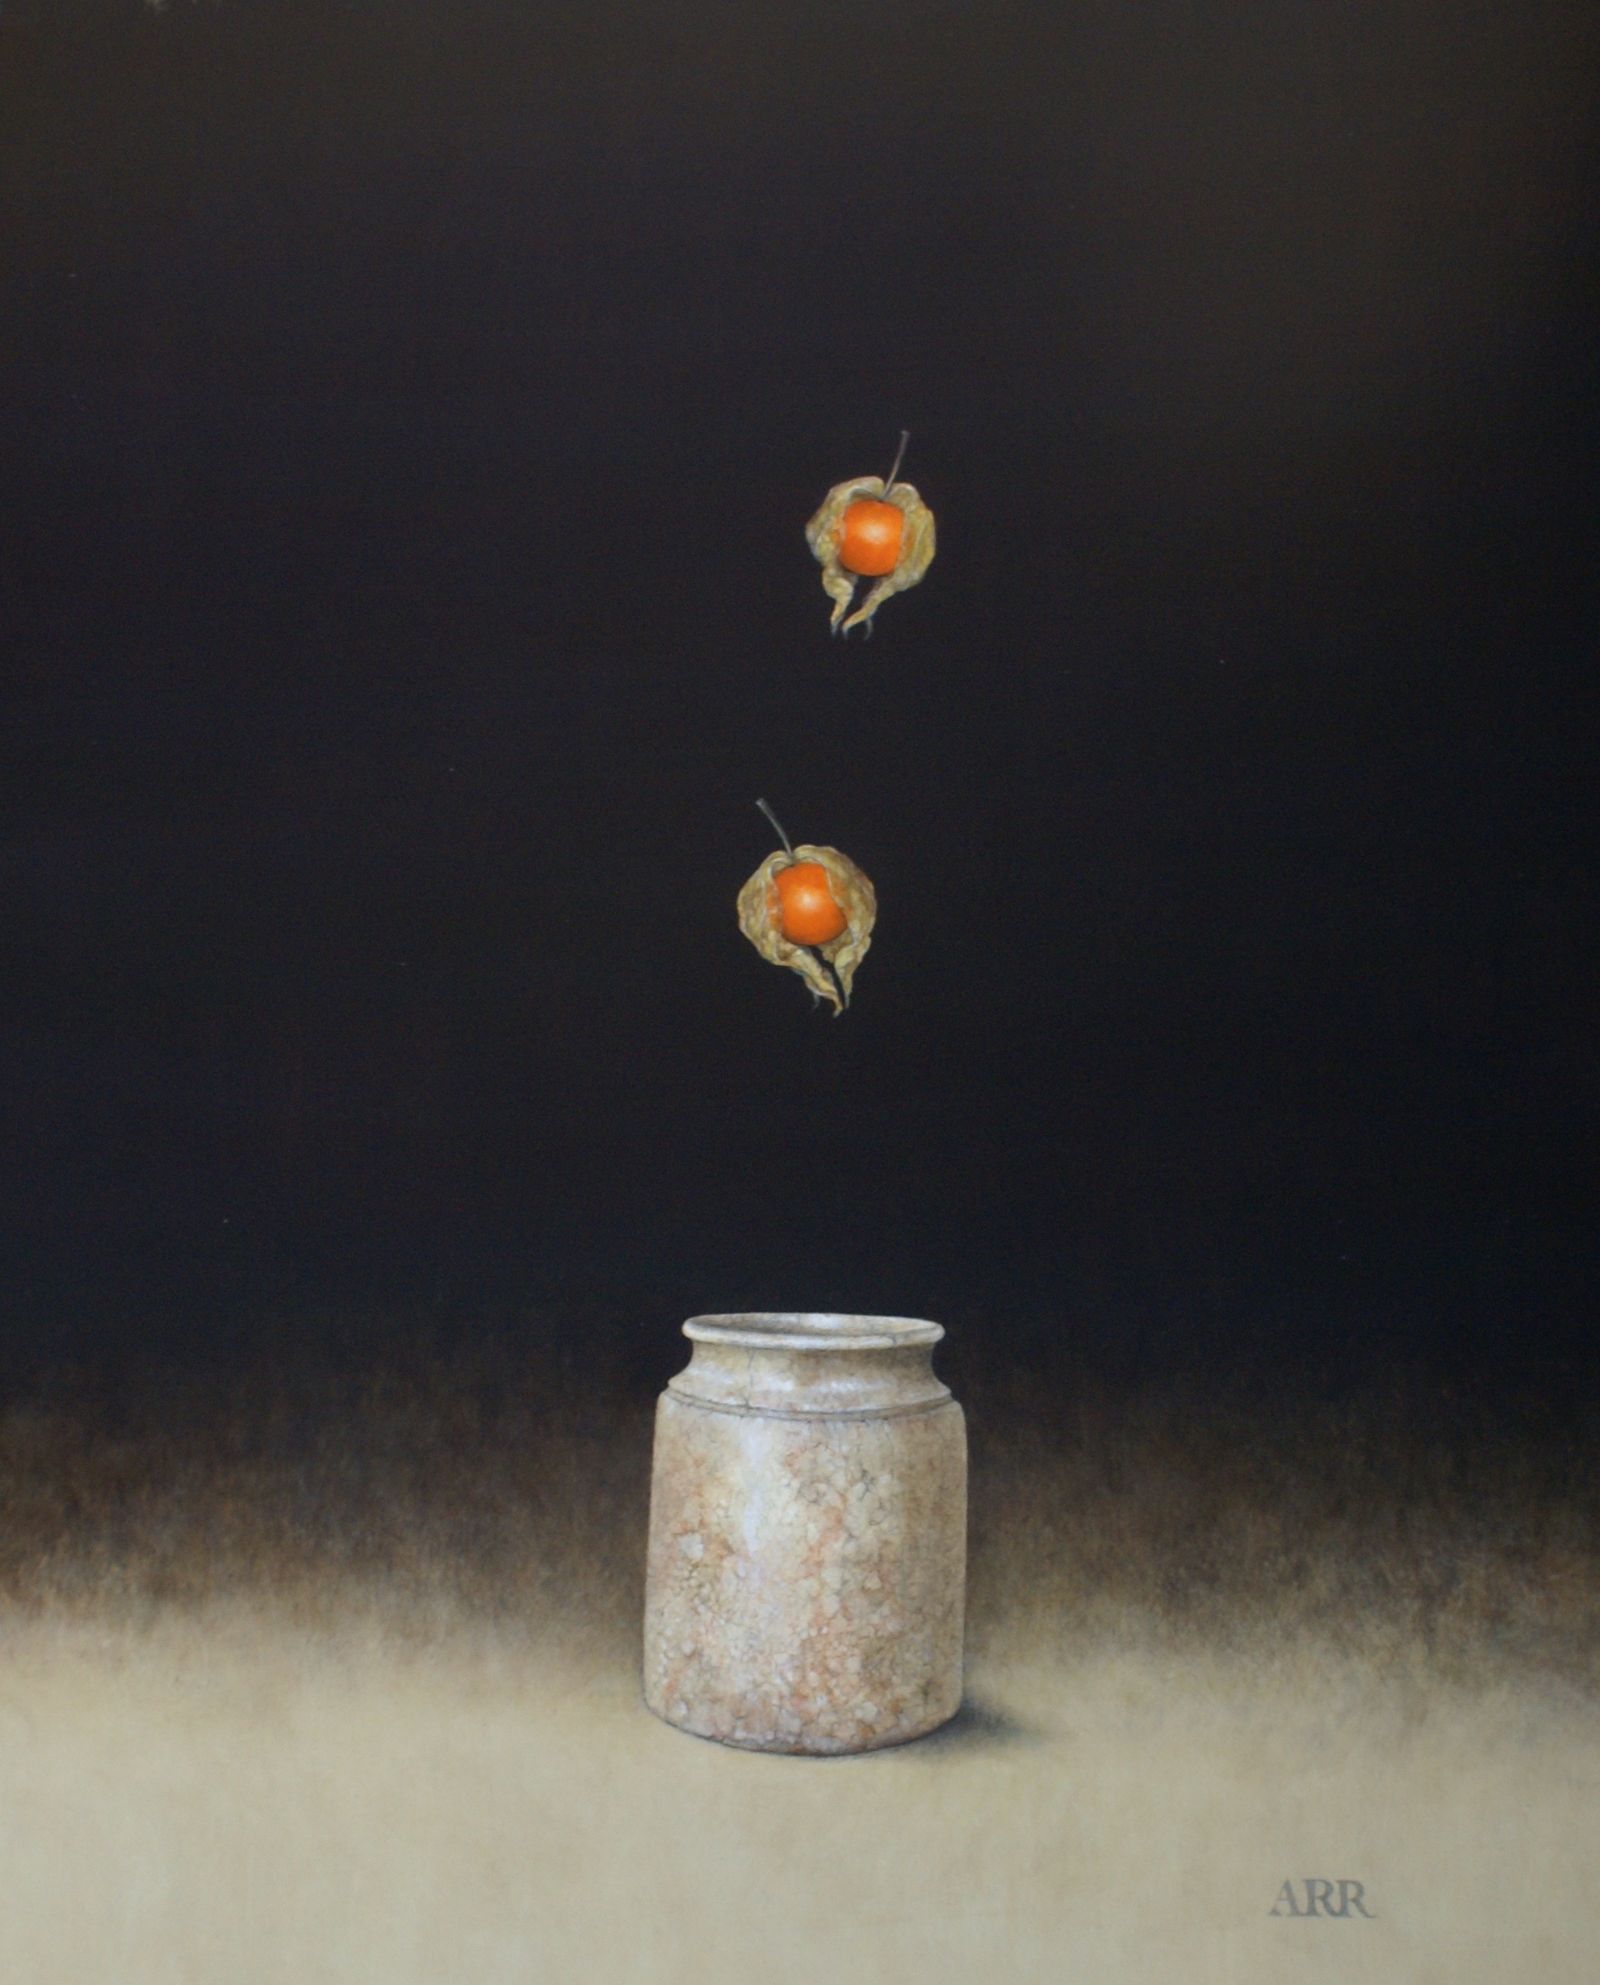 Old Jar with Falling Physalis   by Alison Rankin